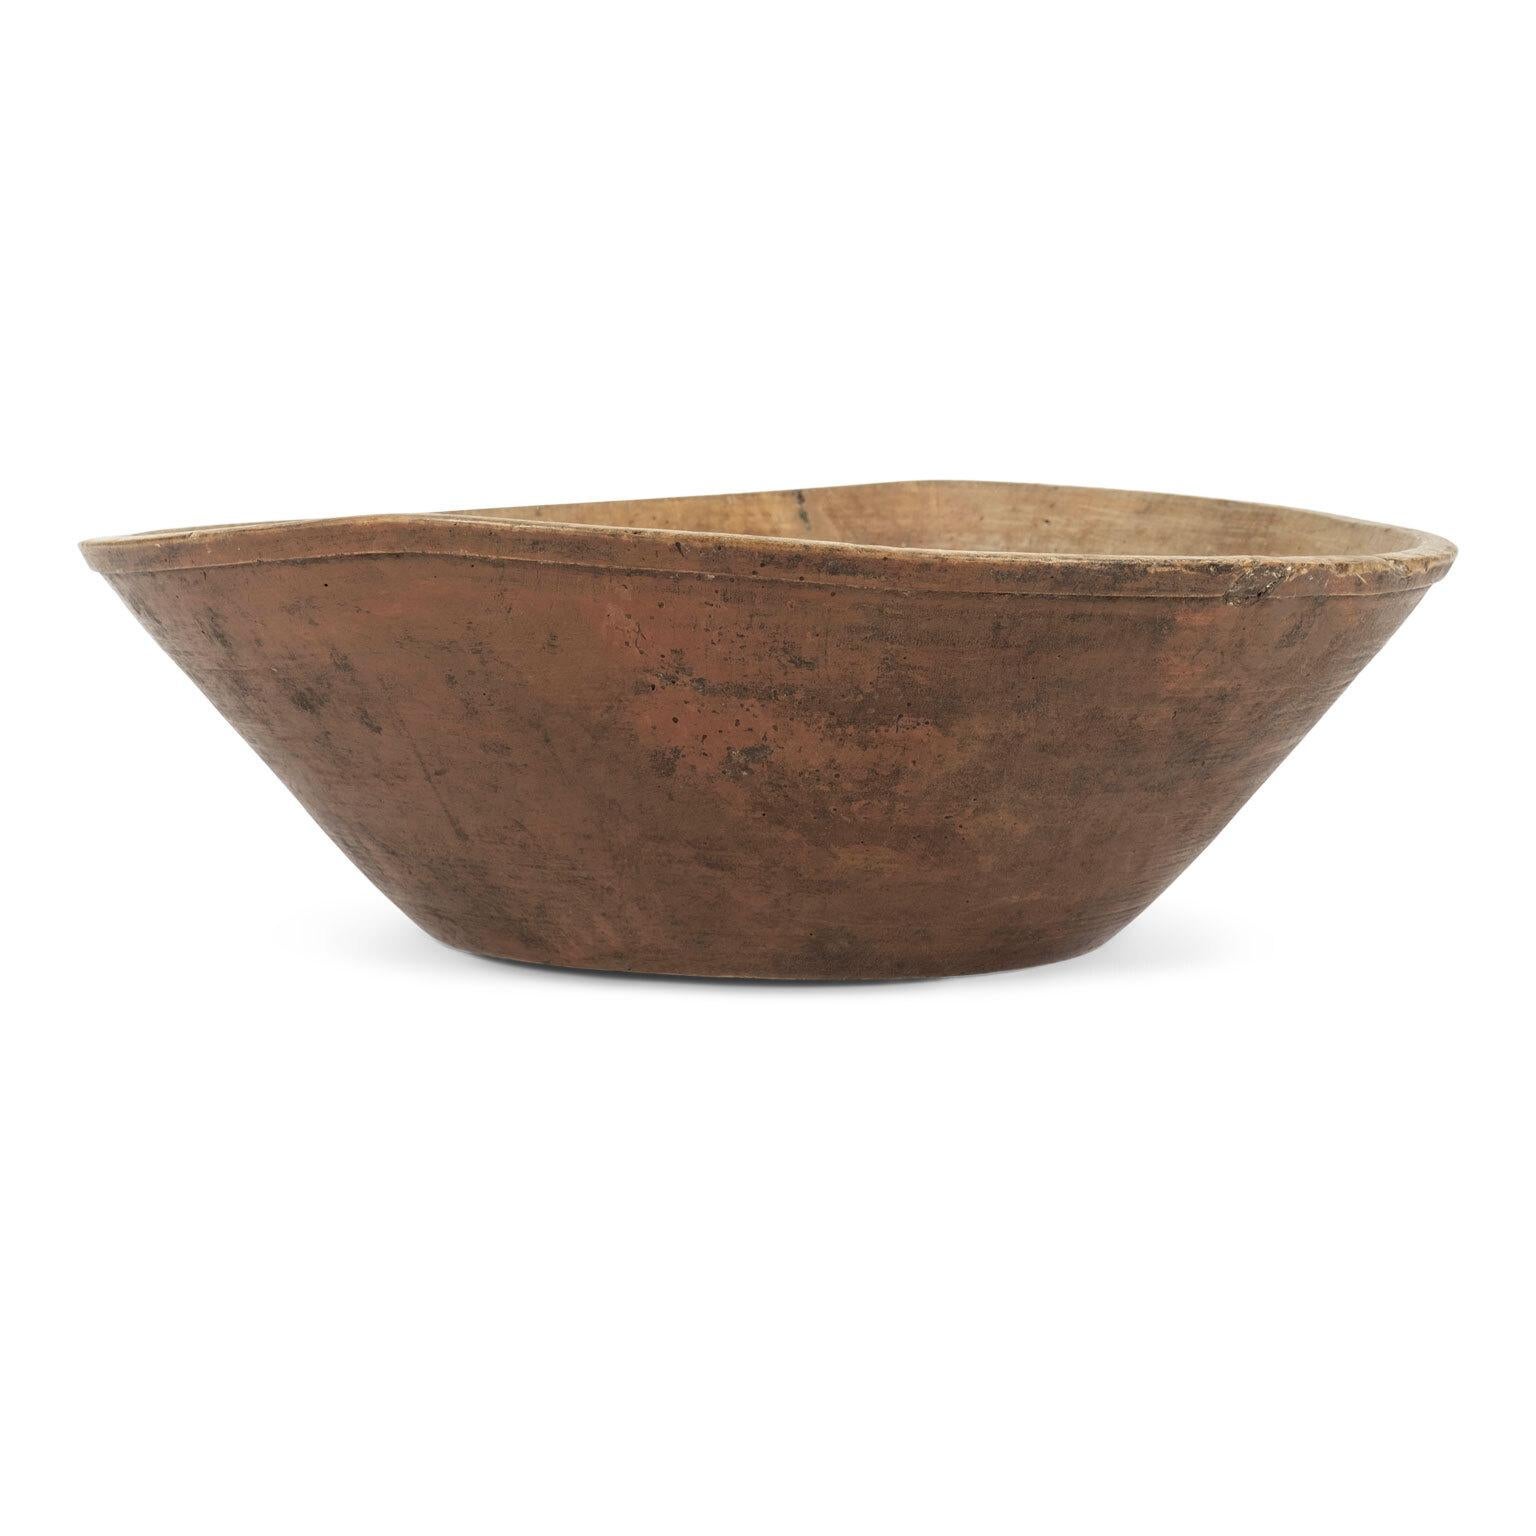 Large hand-carved Swedish bleached birch wood bowl. Brown painted exterior. Dates to 19th century.